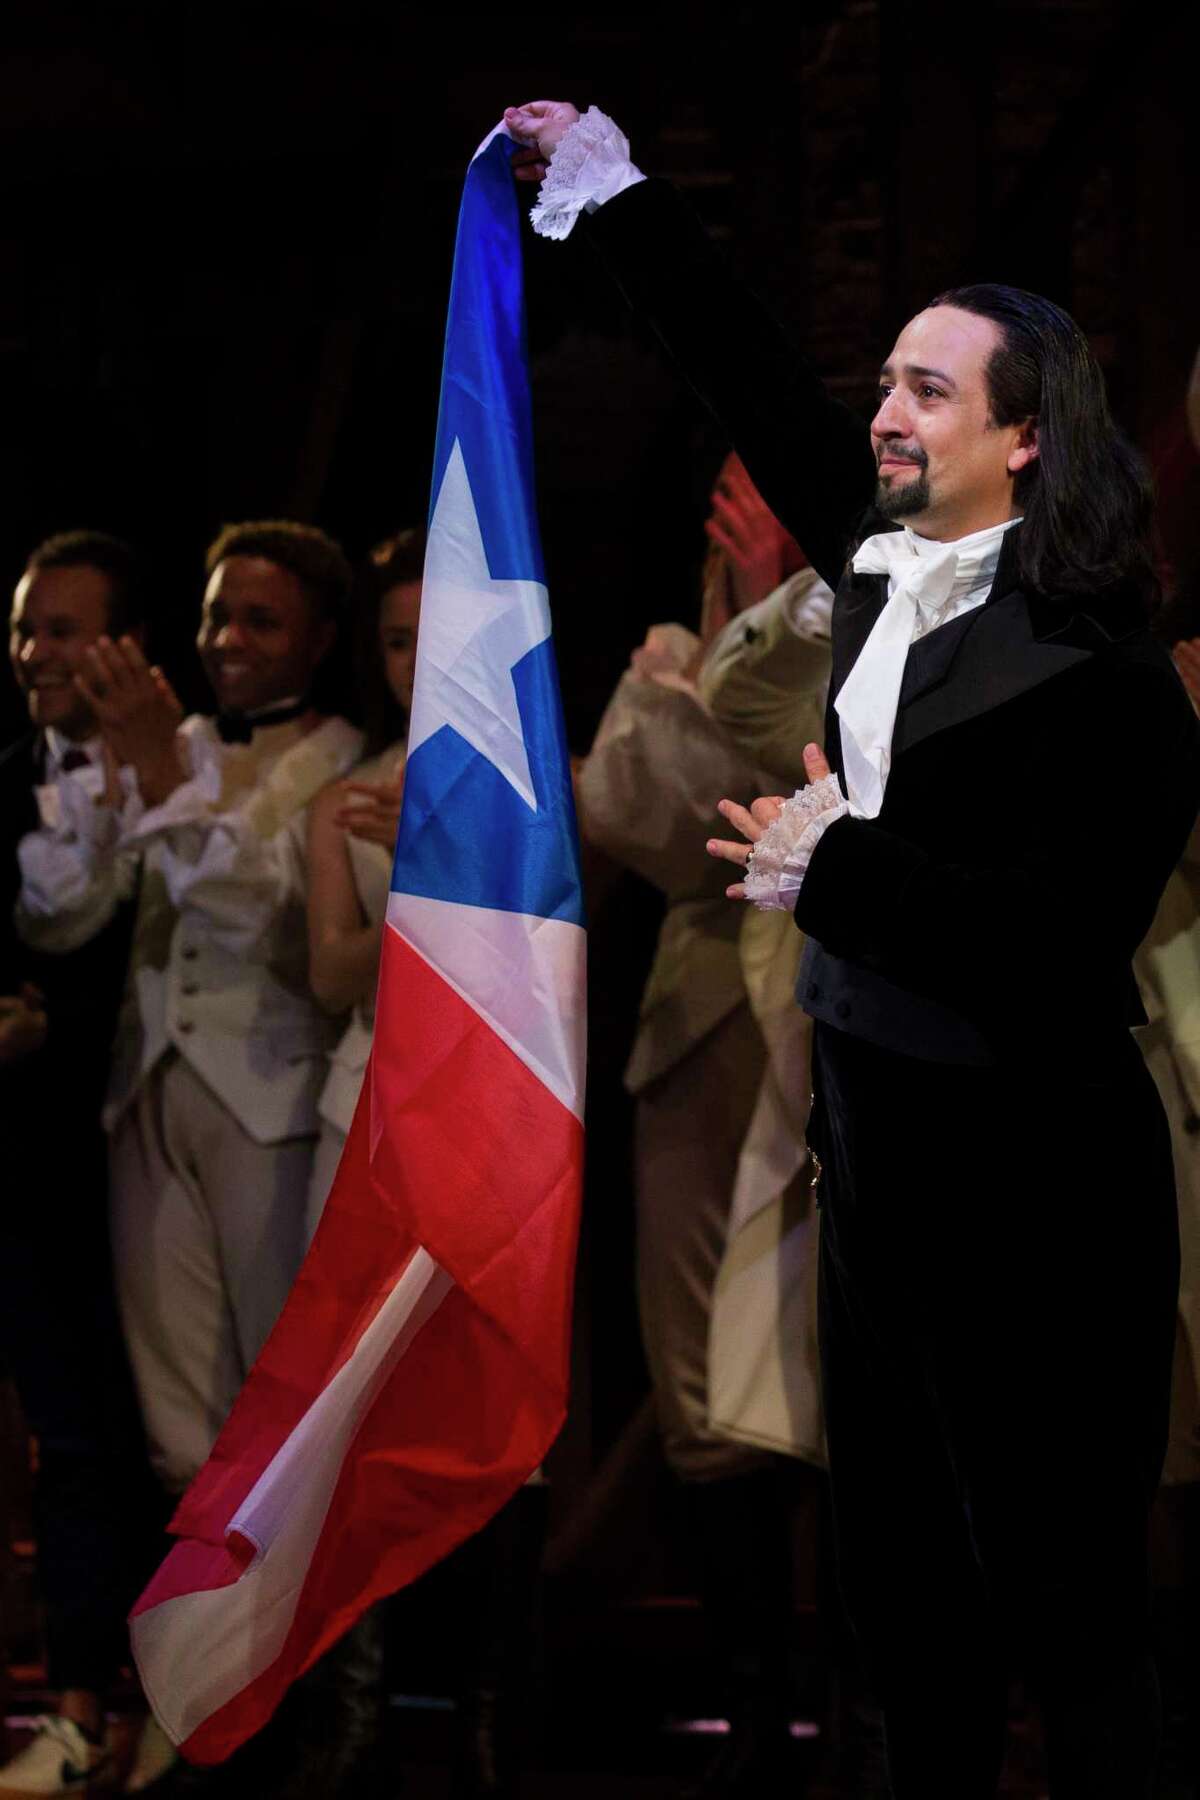 Lin-Manuel Miranda thanks the audience after his performance in "Hamilton" in Puerto Rico.